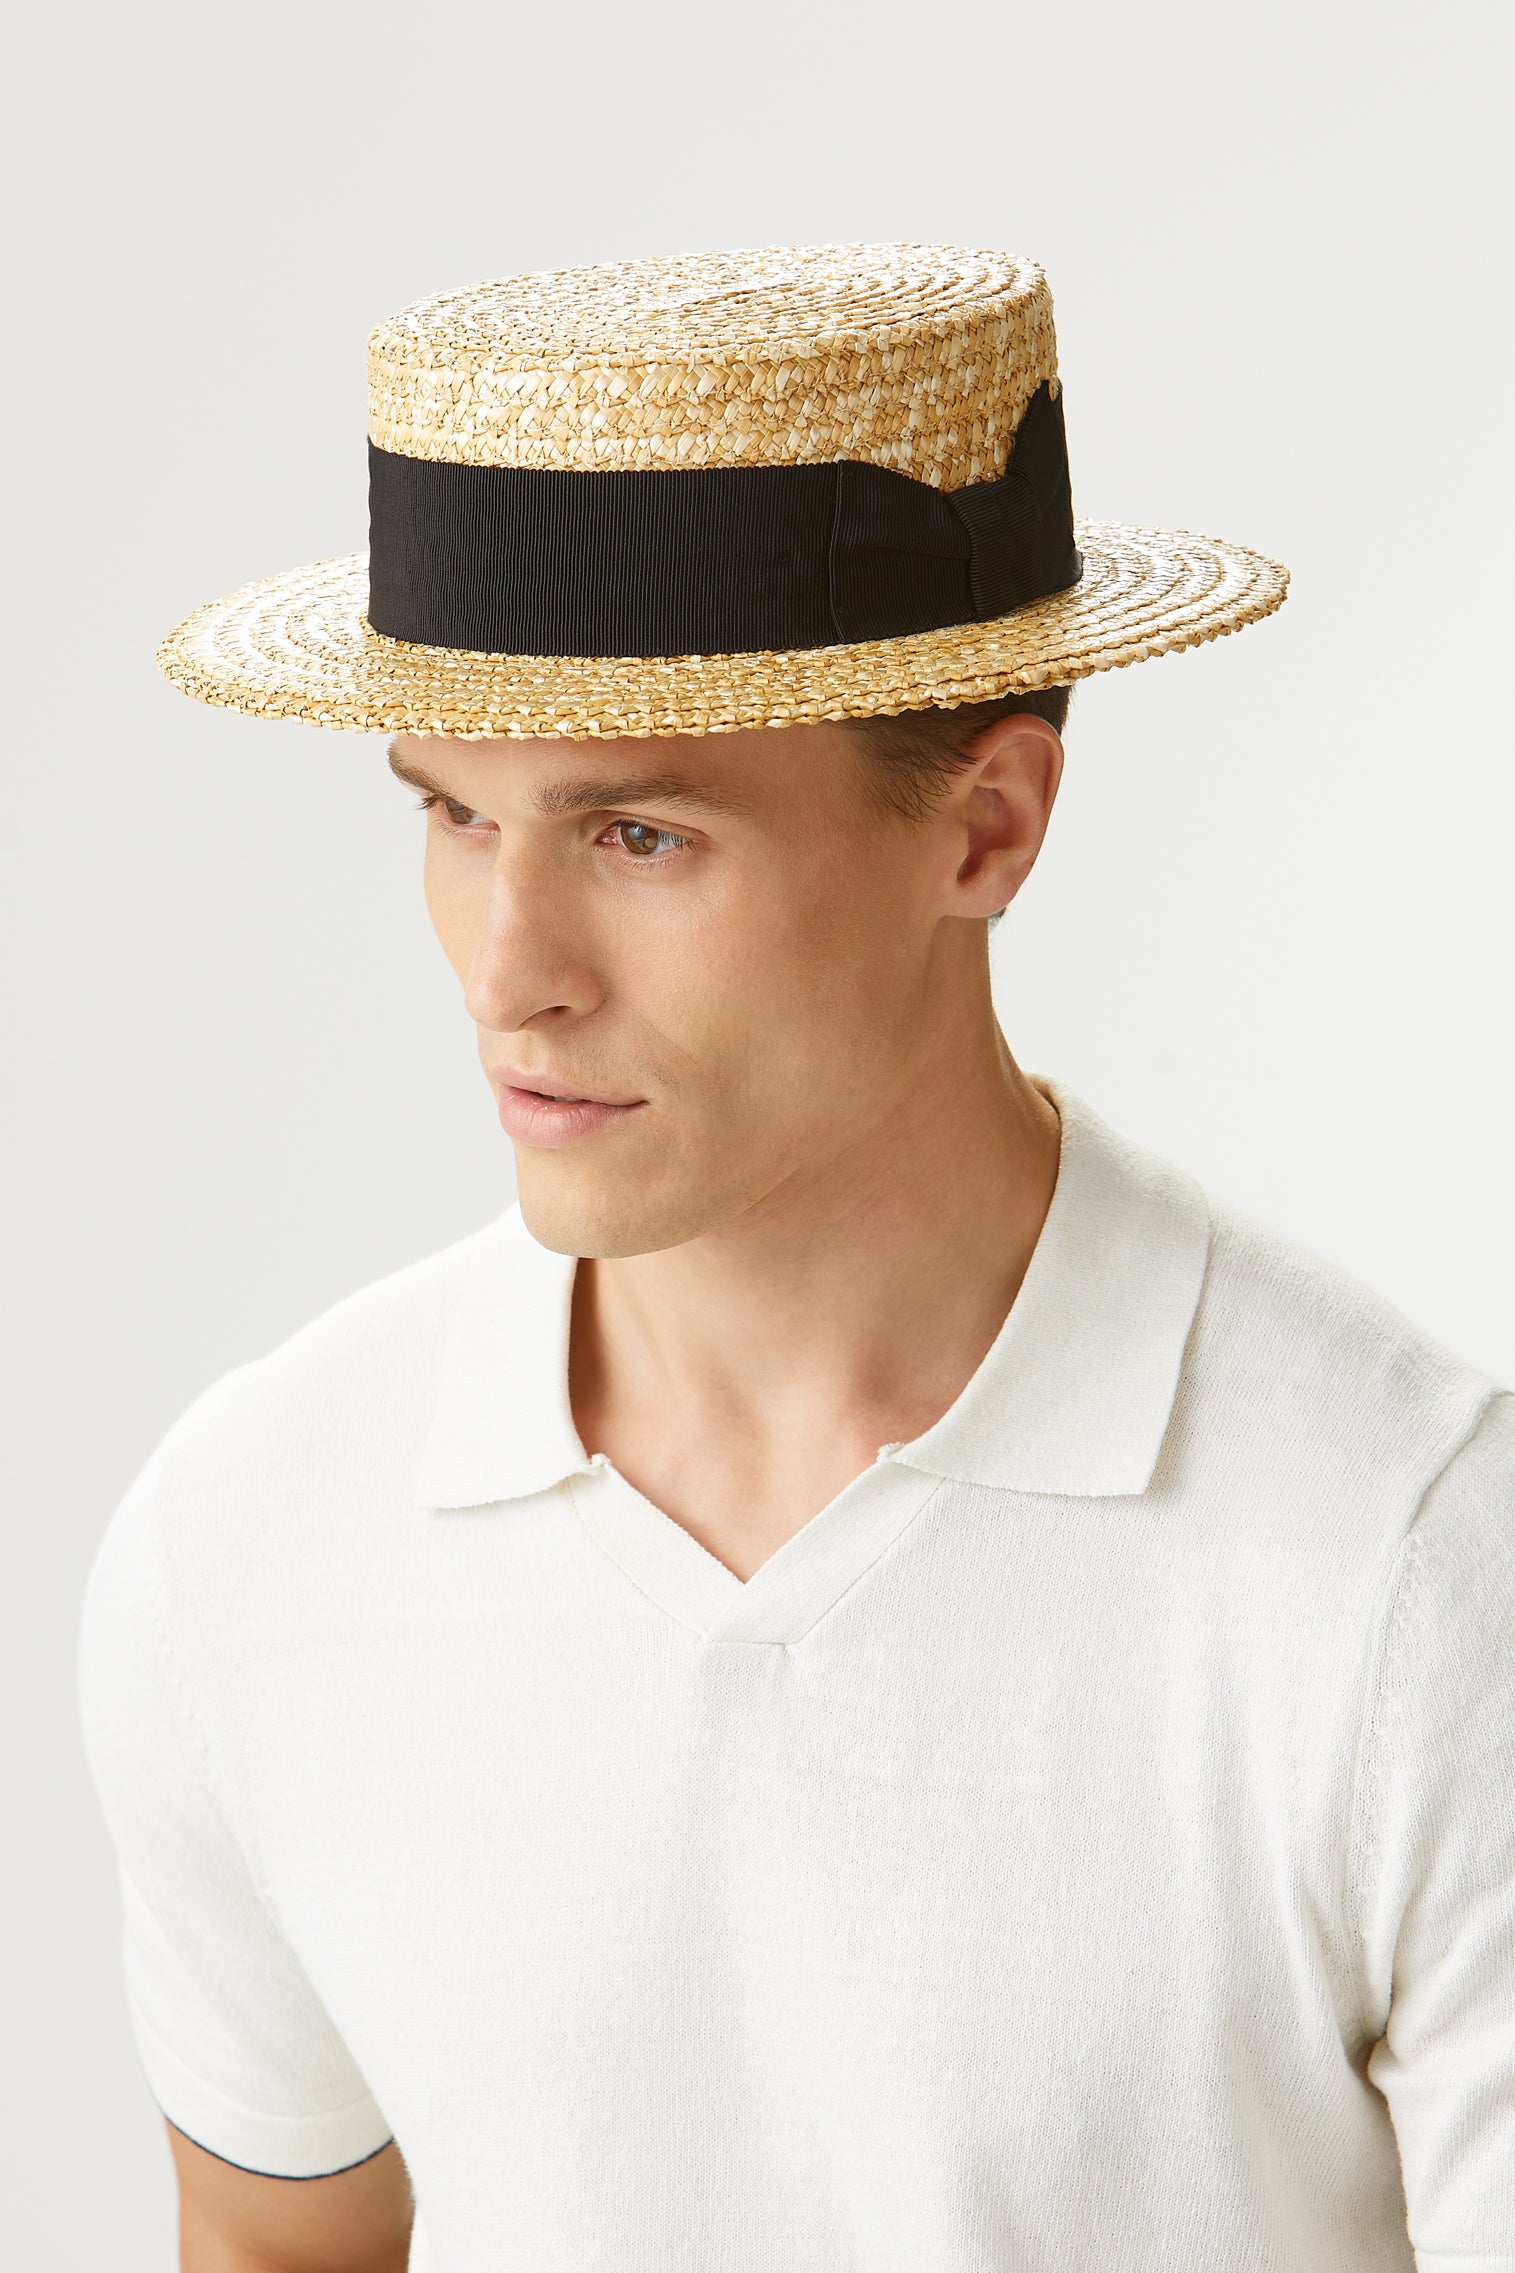 Classic Boater - Father's Day Gift Guide - Lock & Co. Hatters London UK